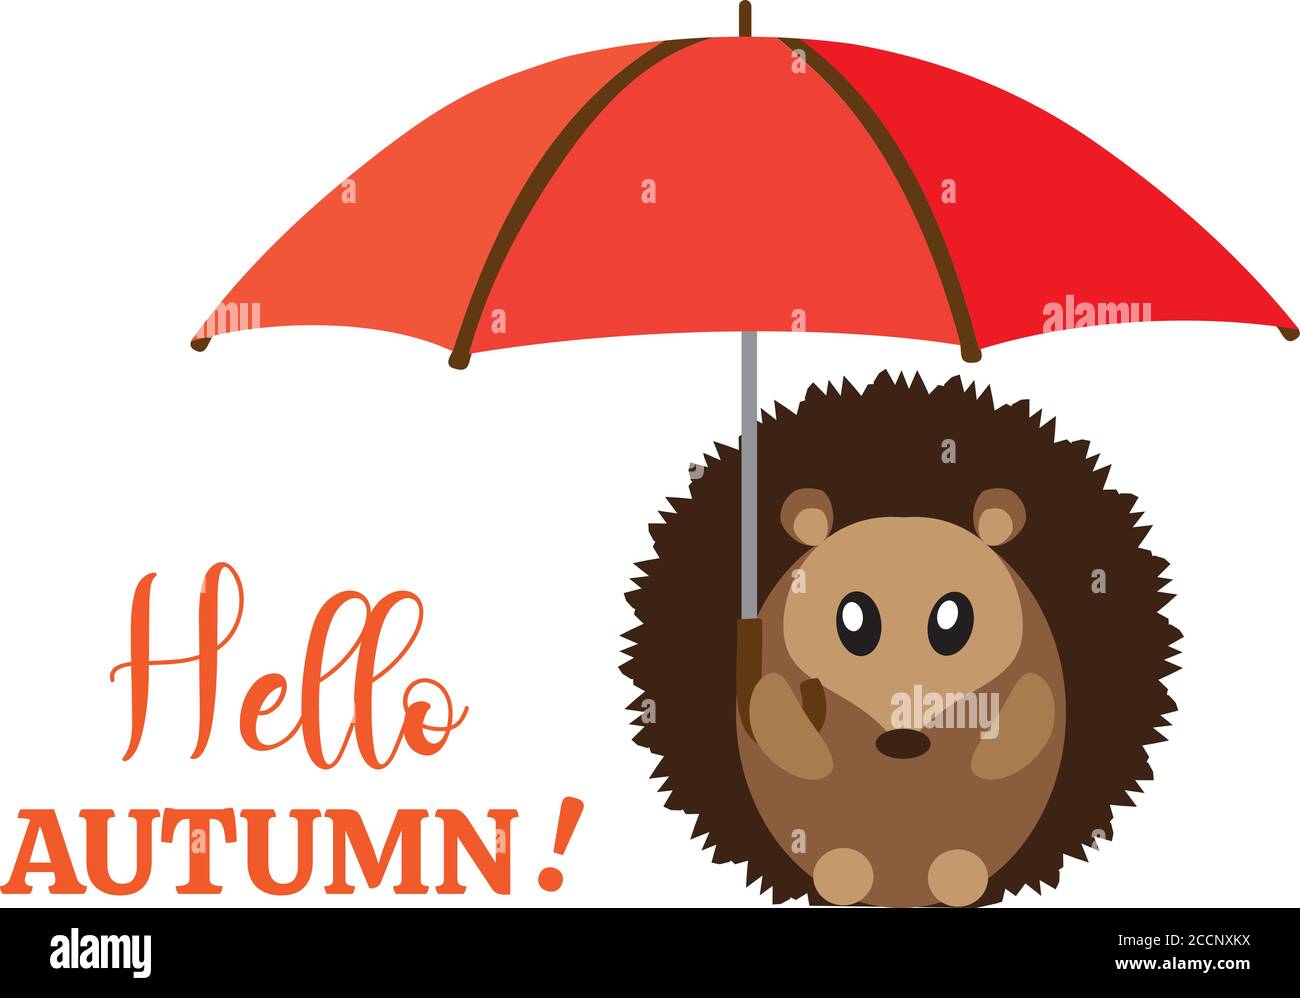 vector illustration of fall, autumn background with a hedgehog holding an umbrella. Stock Vector